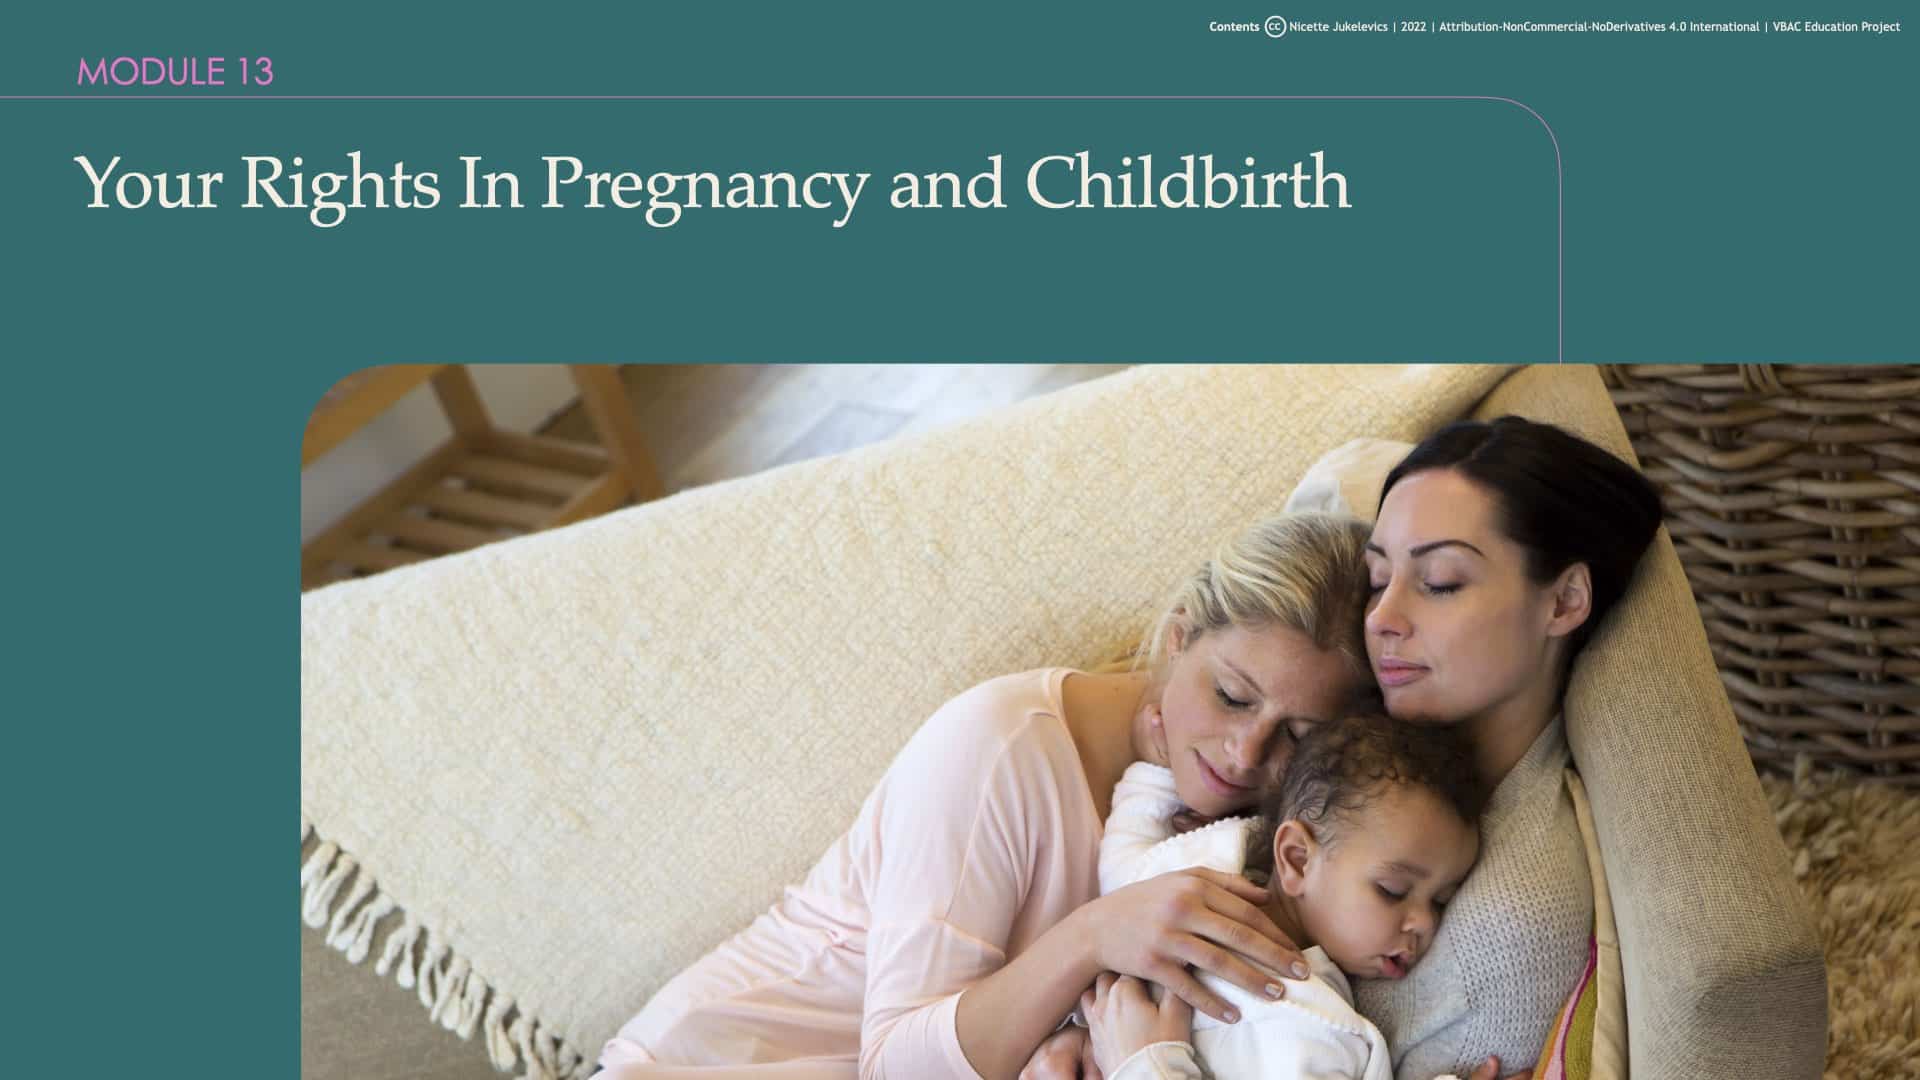 Module 13: Your Rights In Pregnancy and Childbirth